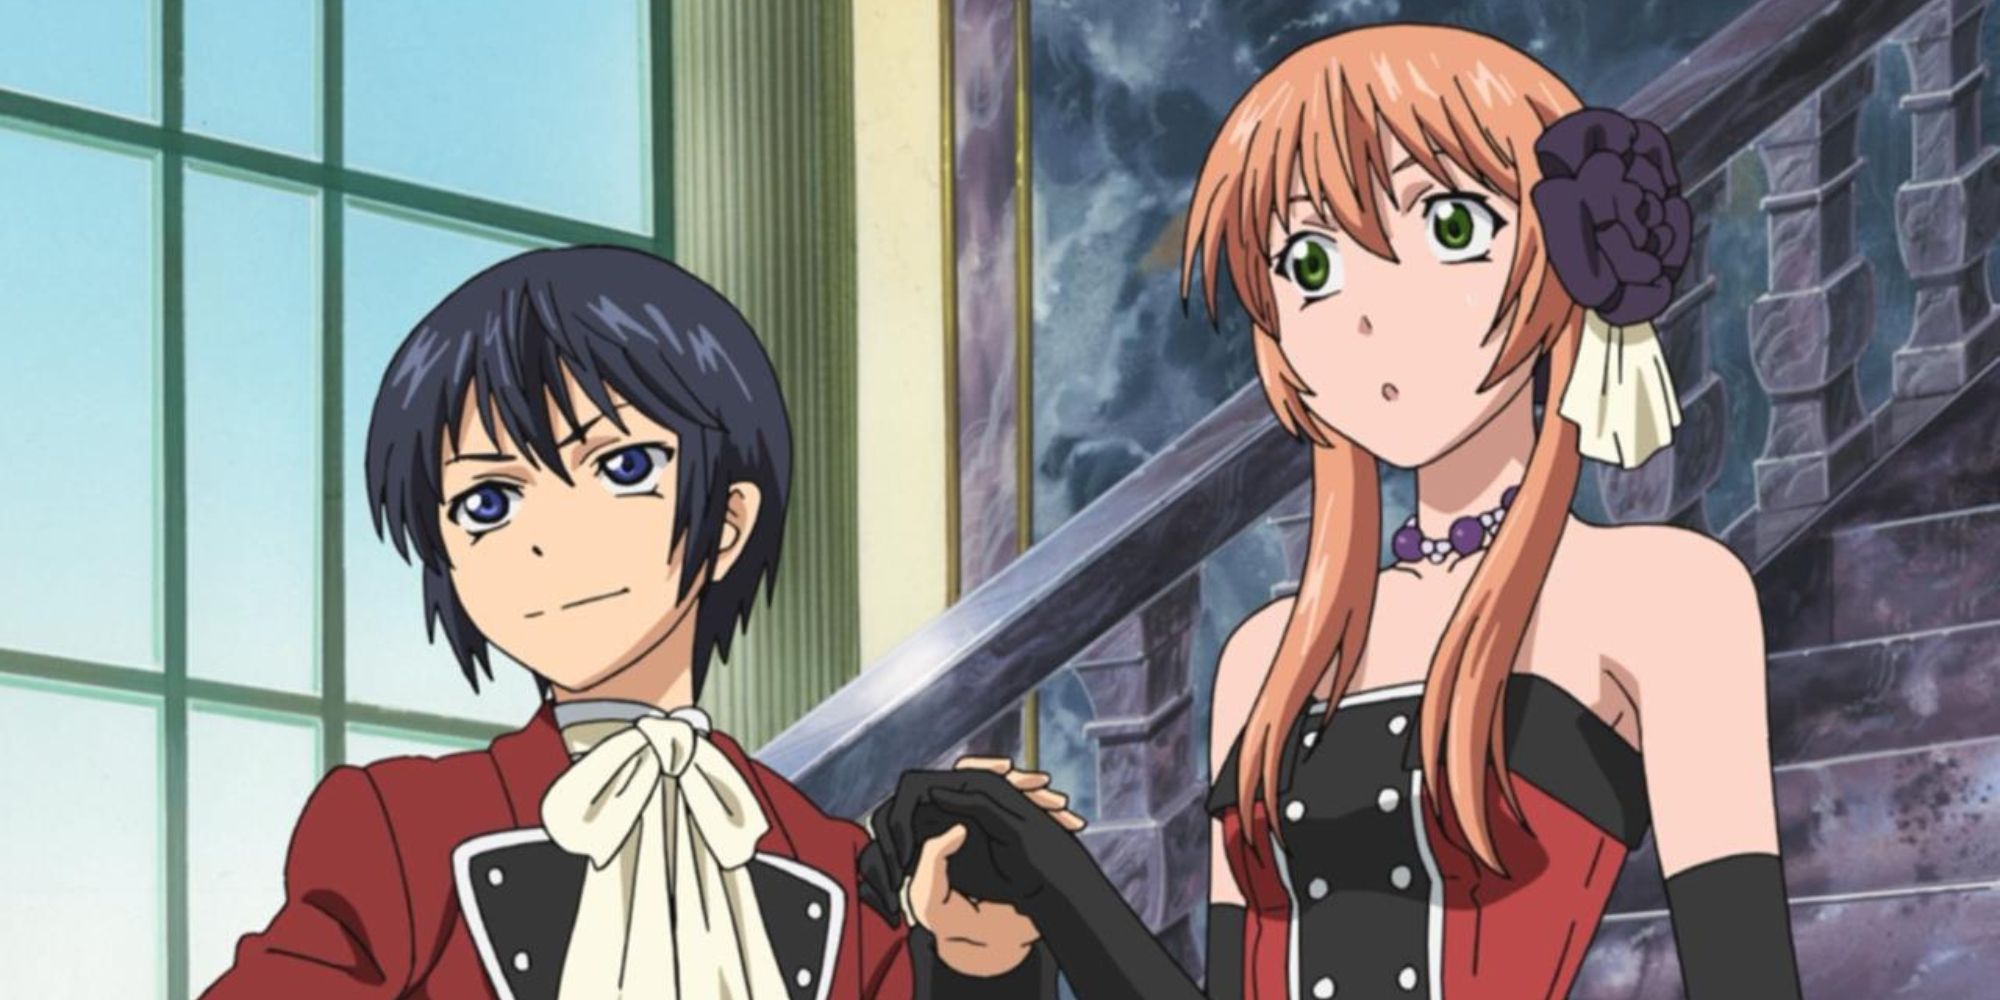 Livius and Nike in Still world is Beautiful